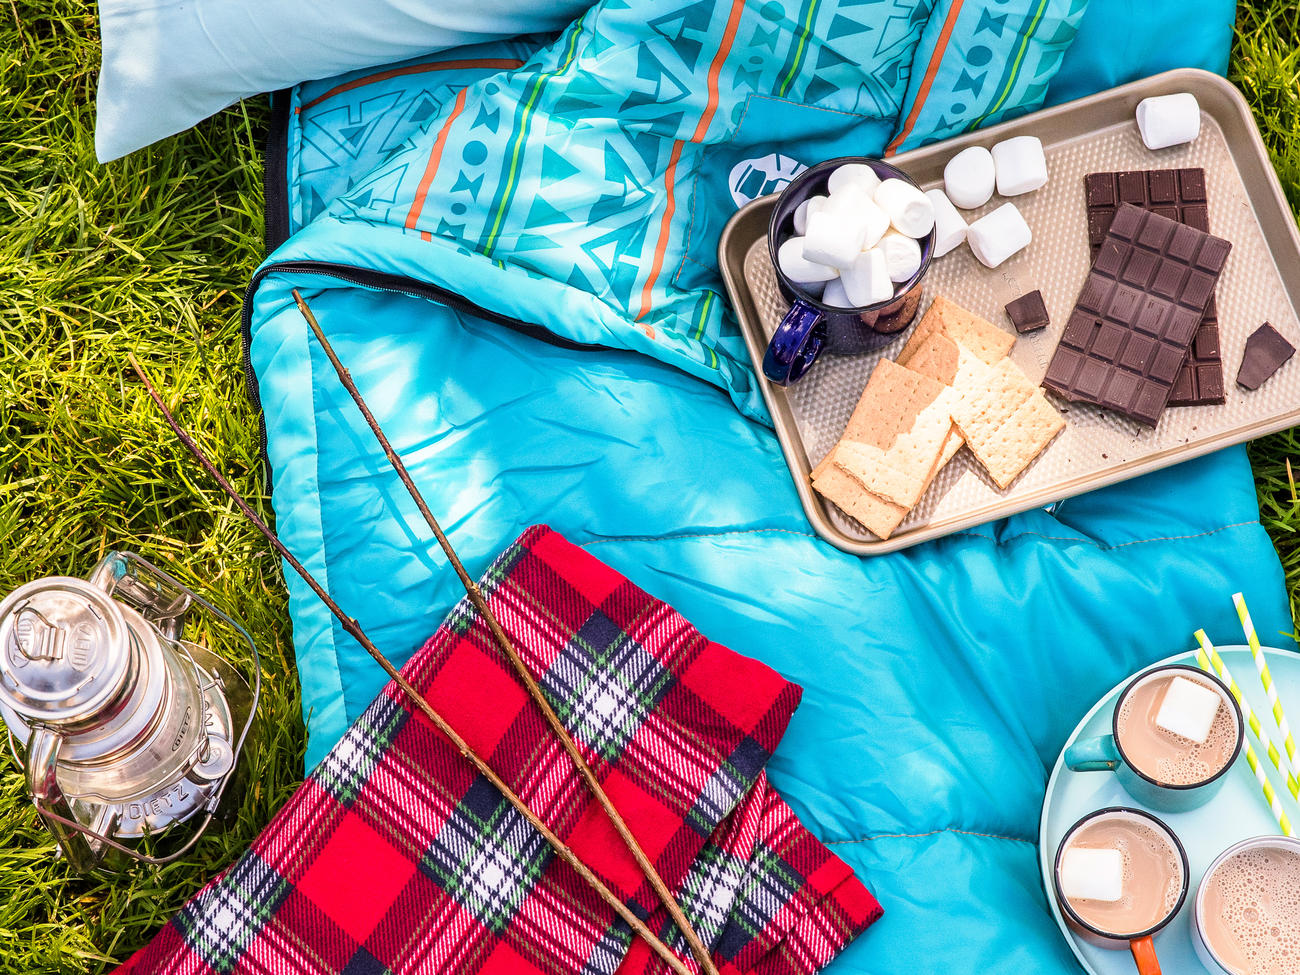 How to Stage a Backyard Campout